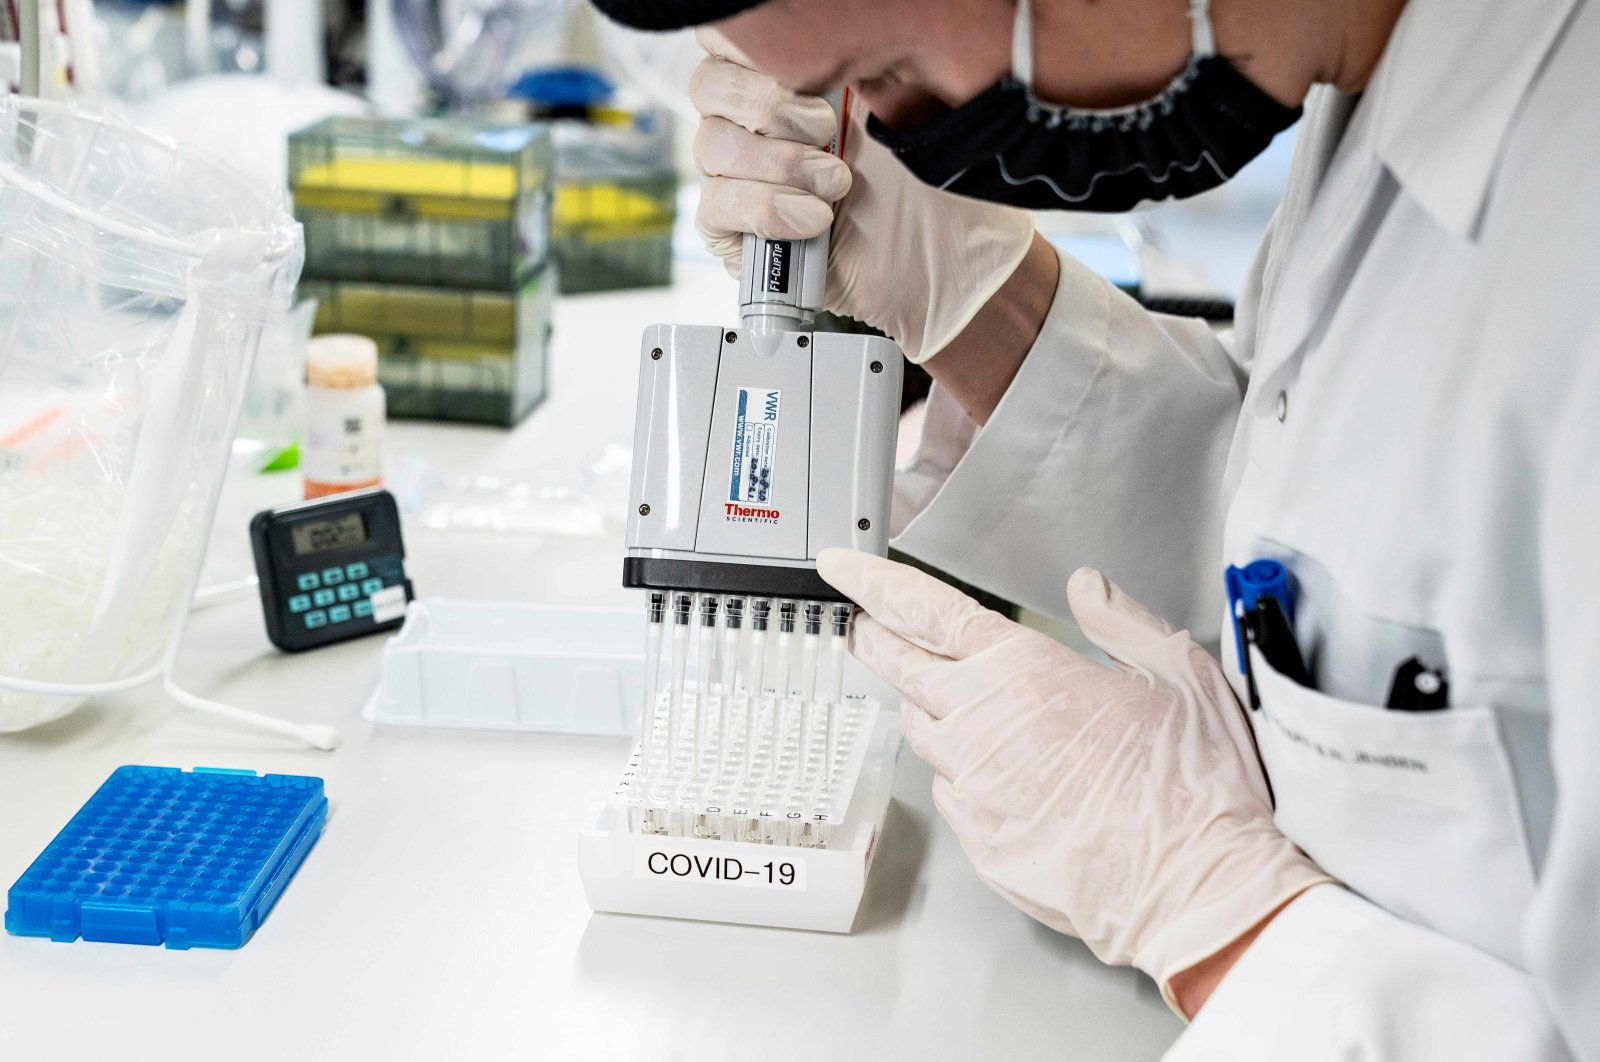 Researchers at Aalborg University screen and analyze positive coronavirus samples for the virus variant cluster B117 from the United Kingdom, in Aalborg, Denmark, Jan. 15, 2021. (AFP Photo)